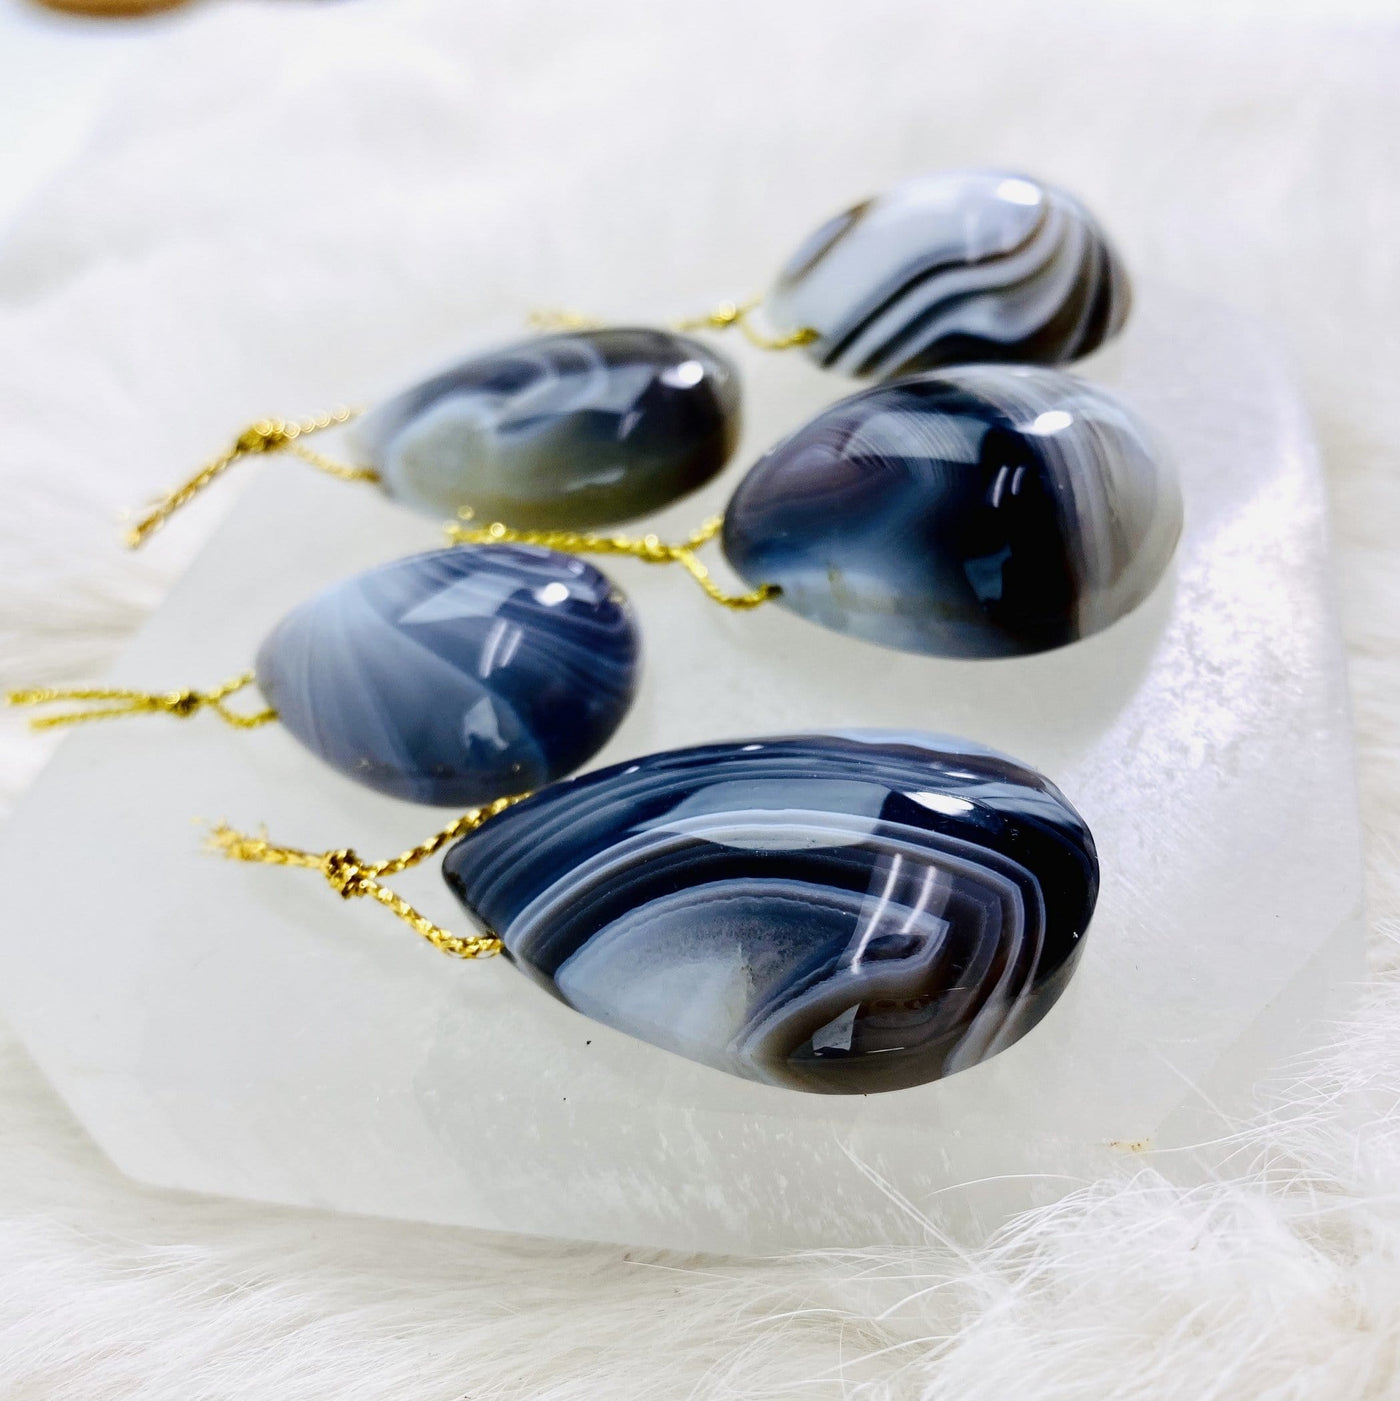 Side Picture shot of the agate tumbled pendants.